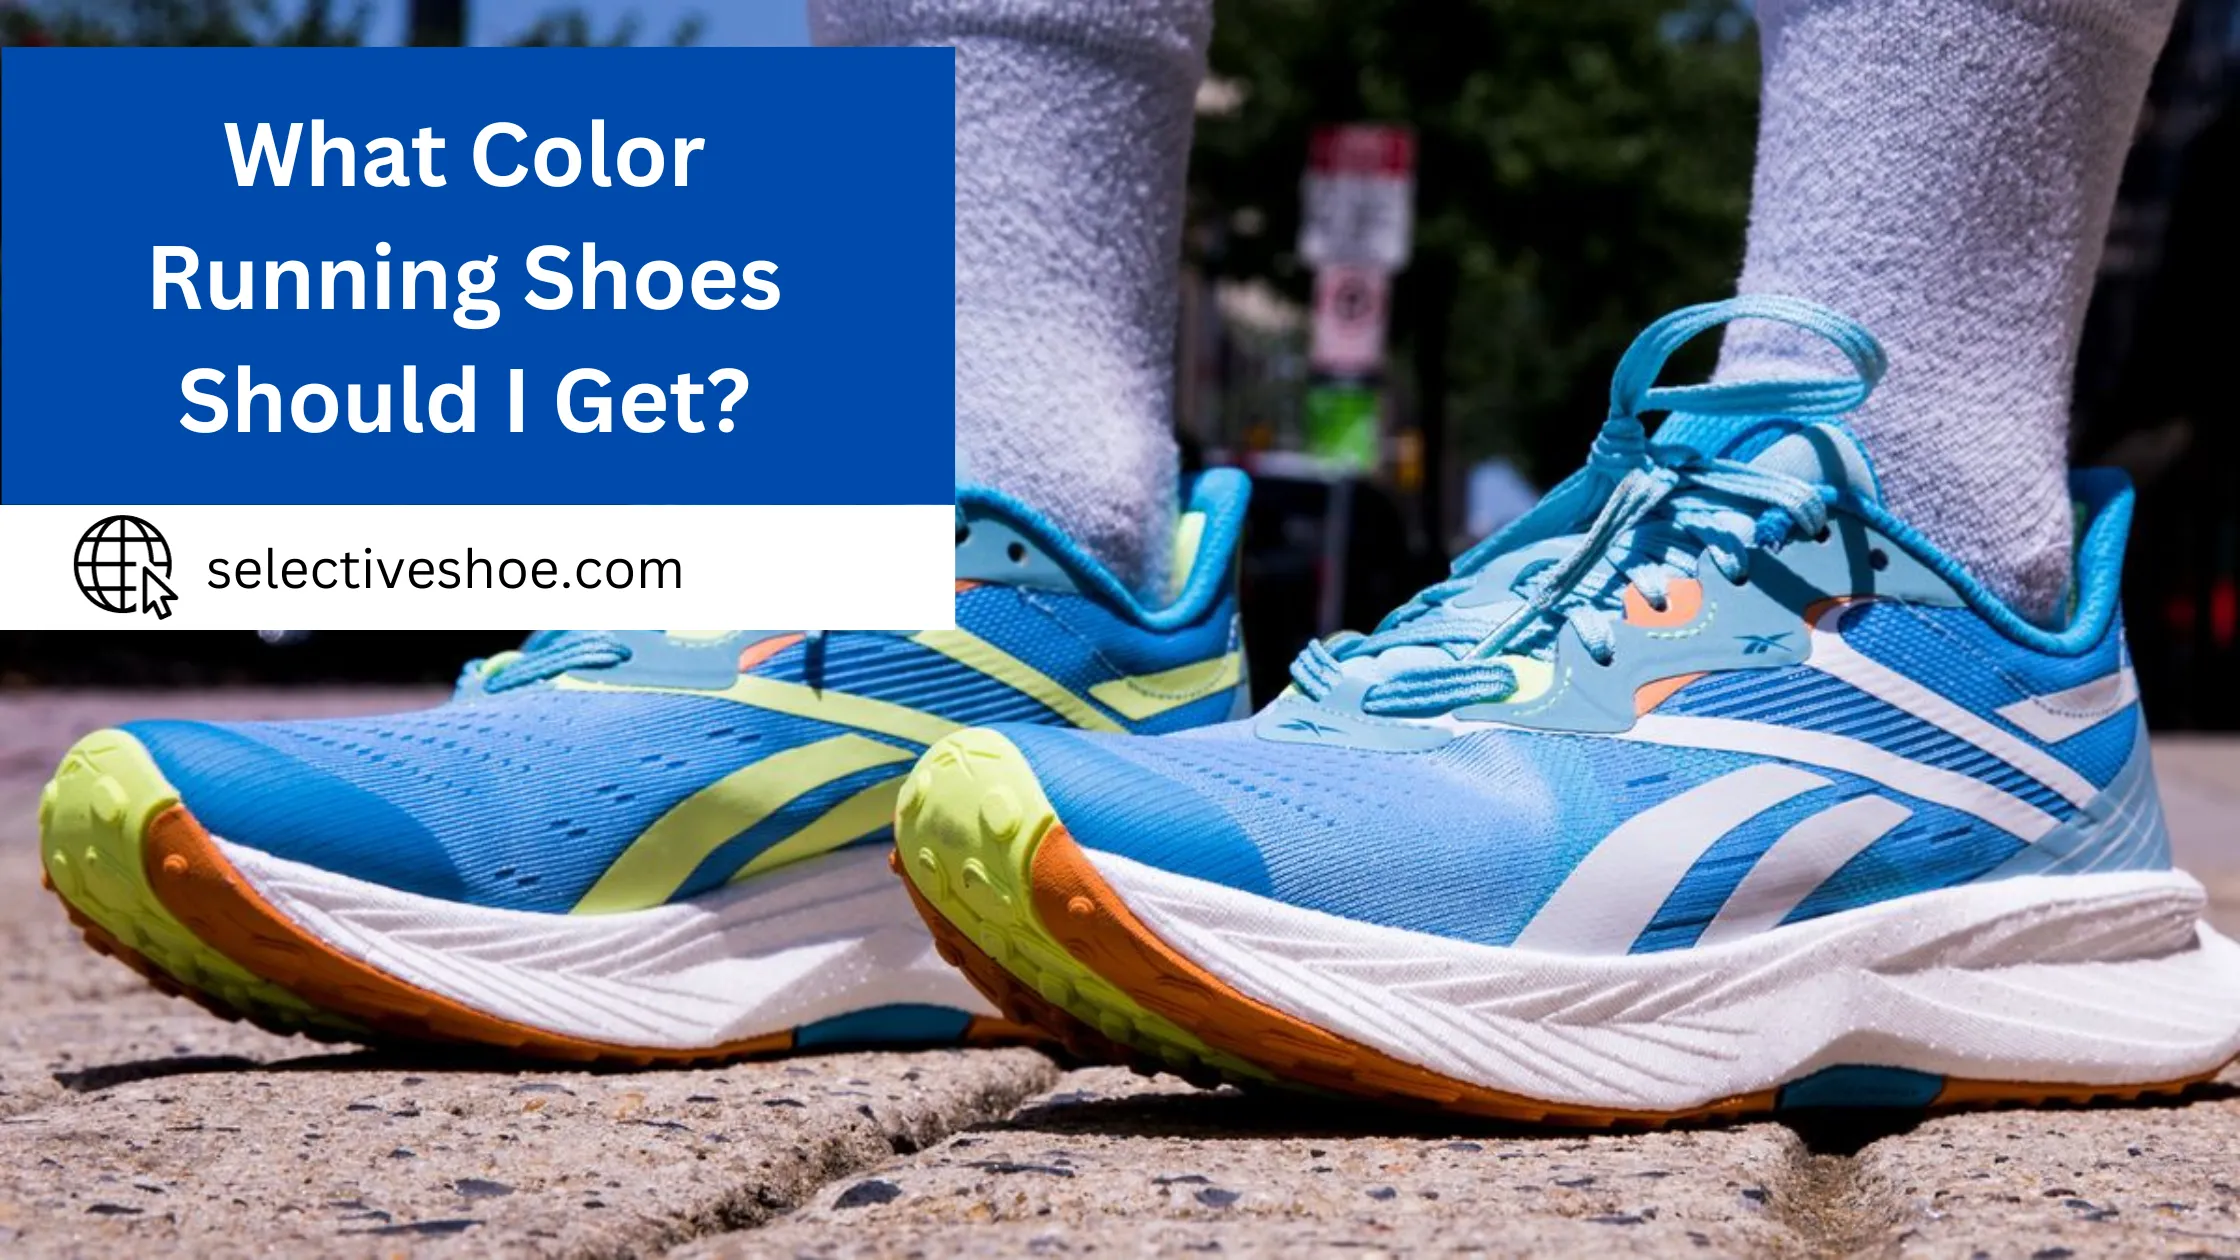 What Color Running Shoes Should I Get? A Detailed Analysis